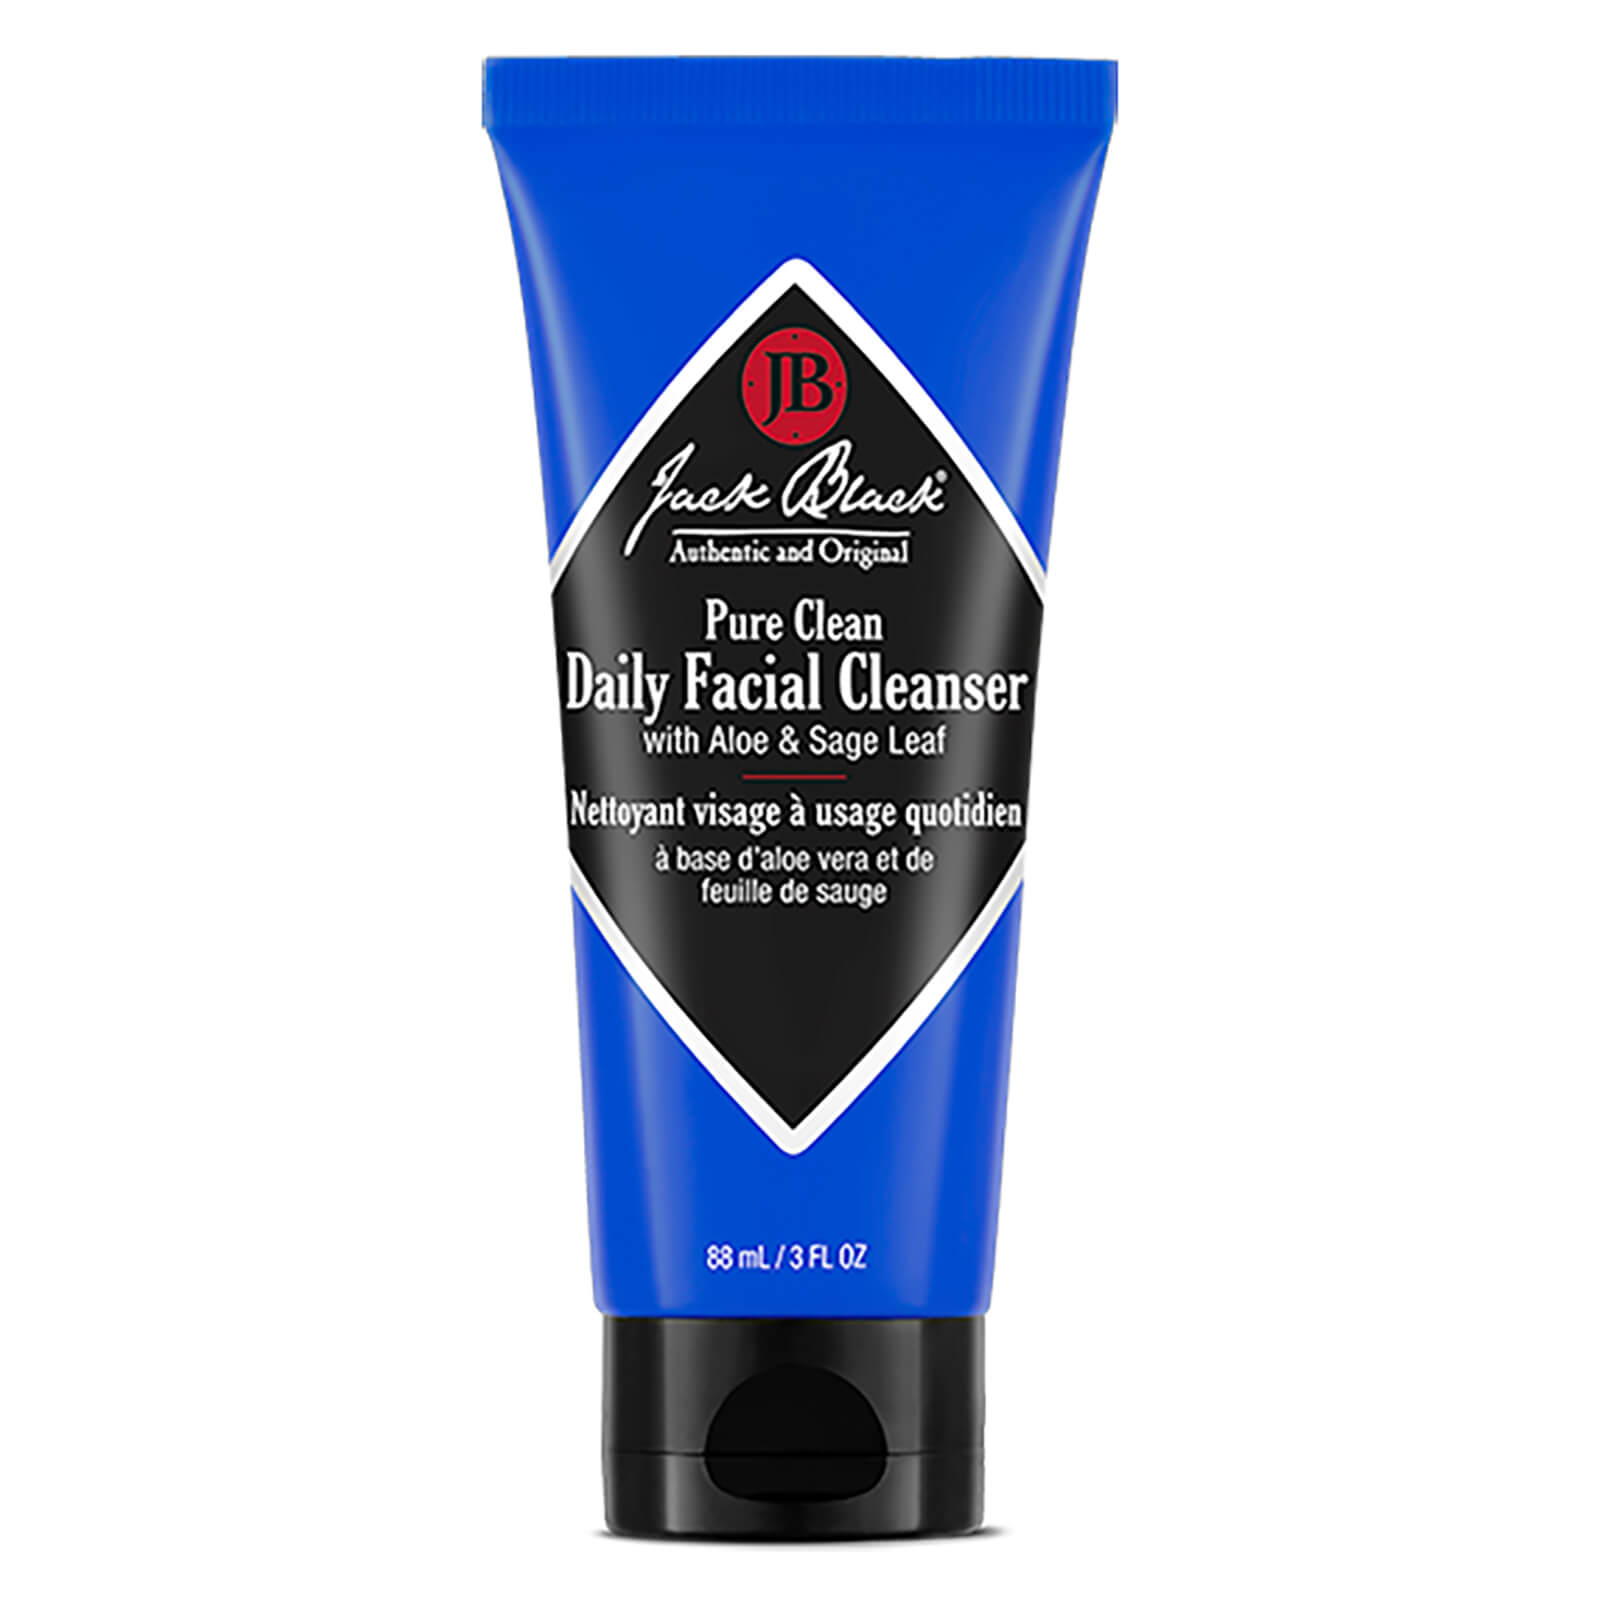 Jack Black Pure Clean Daily Facial Cleanser 3 oz